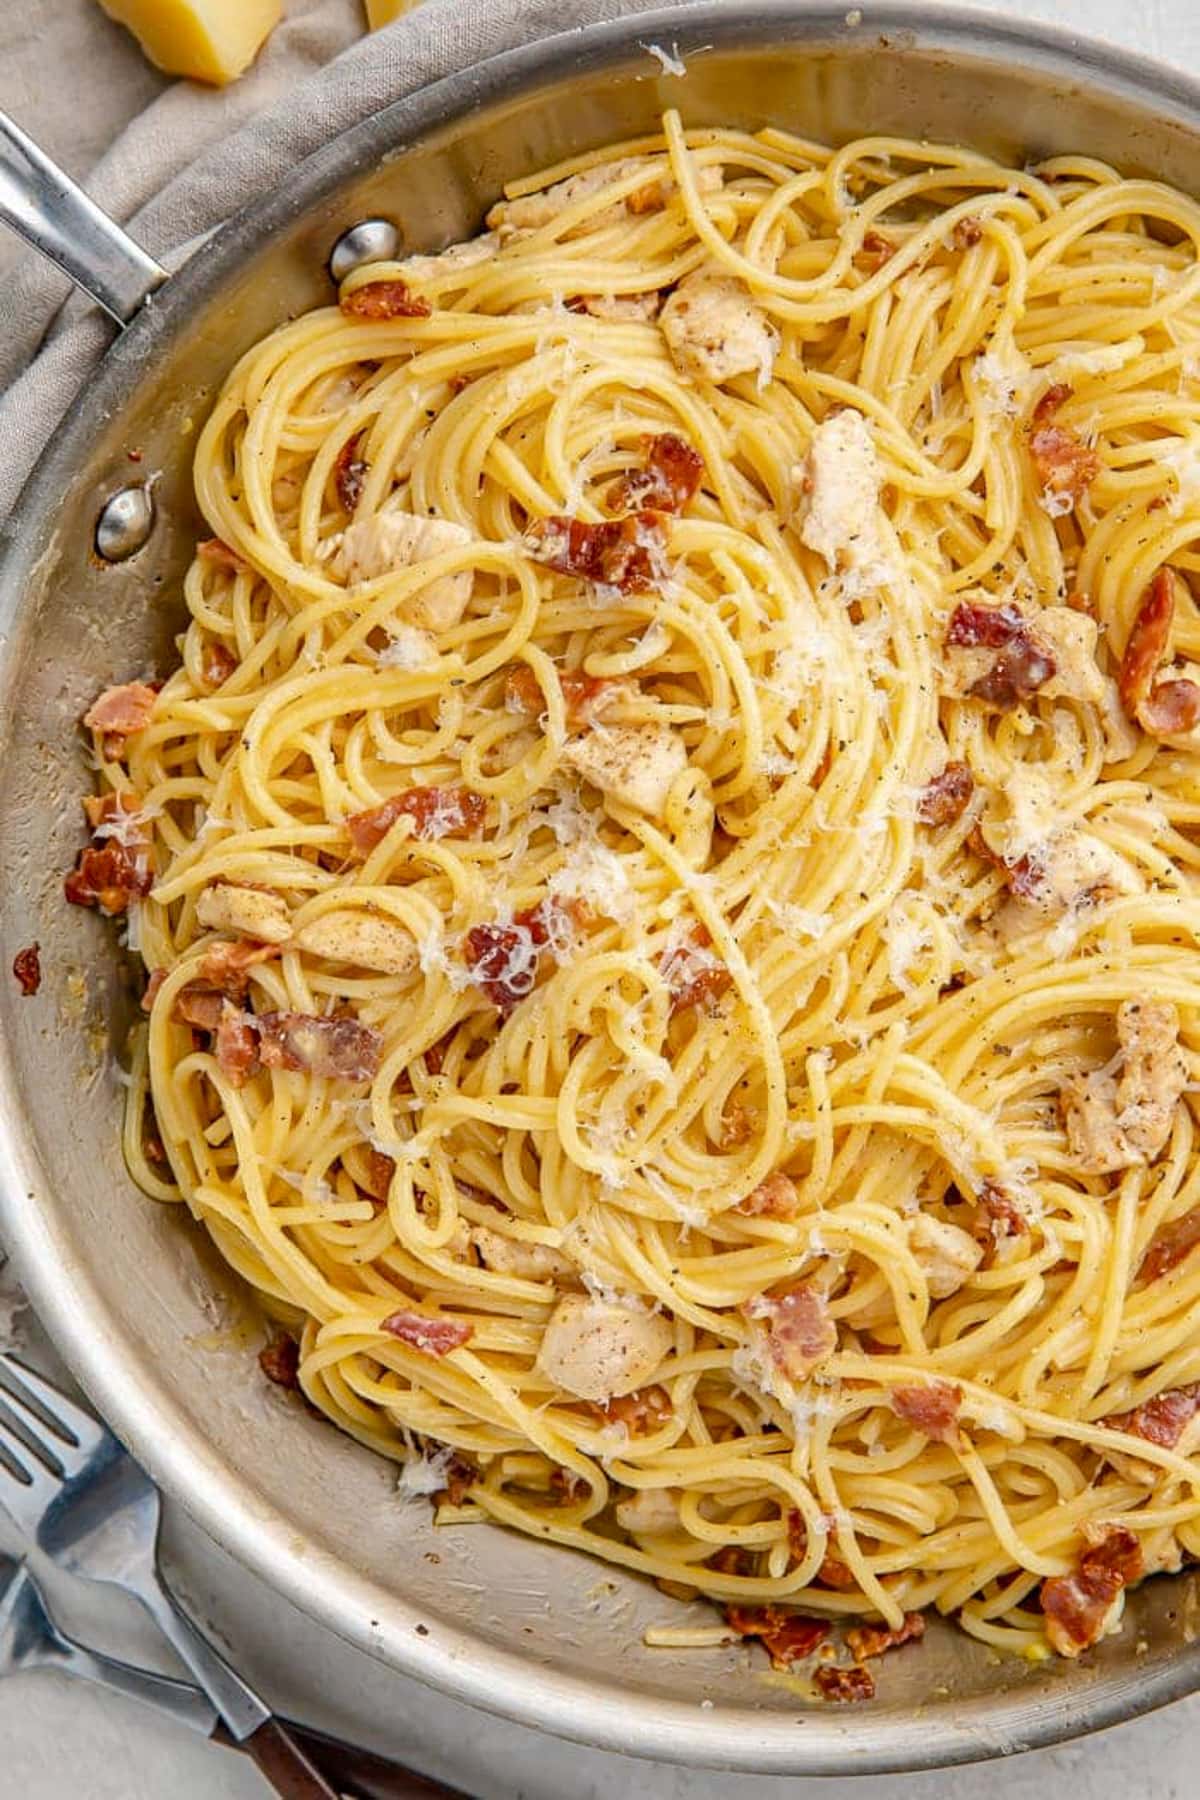 Chicken carbonara with angel hair pasta in a large silver skillet.